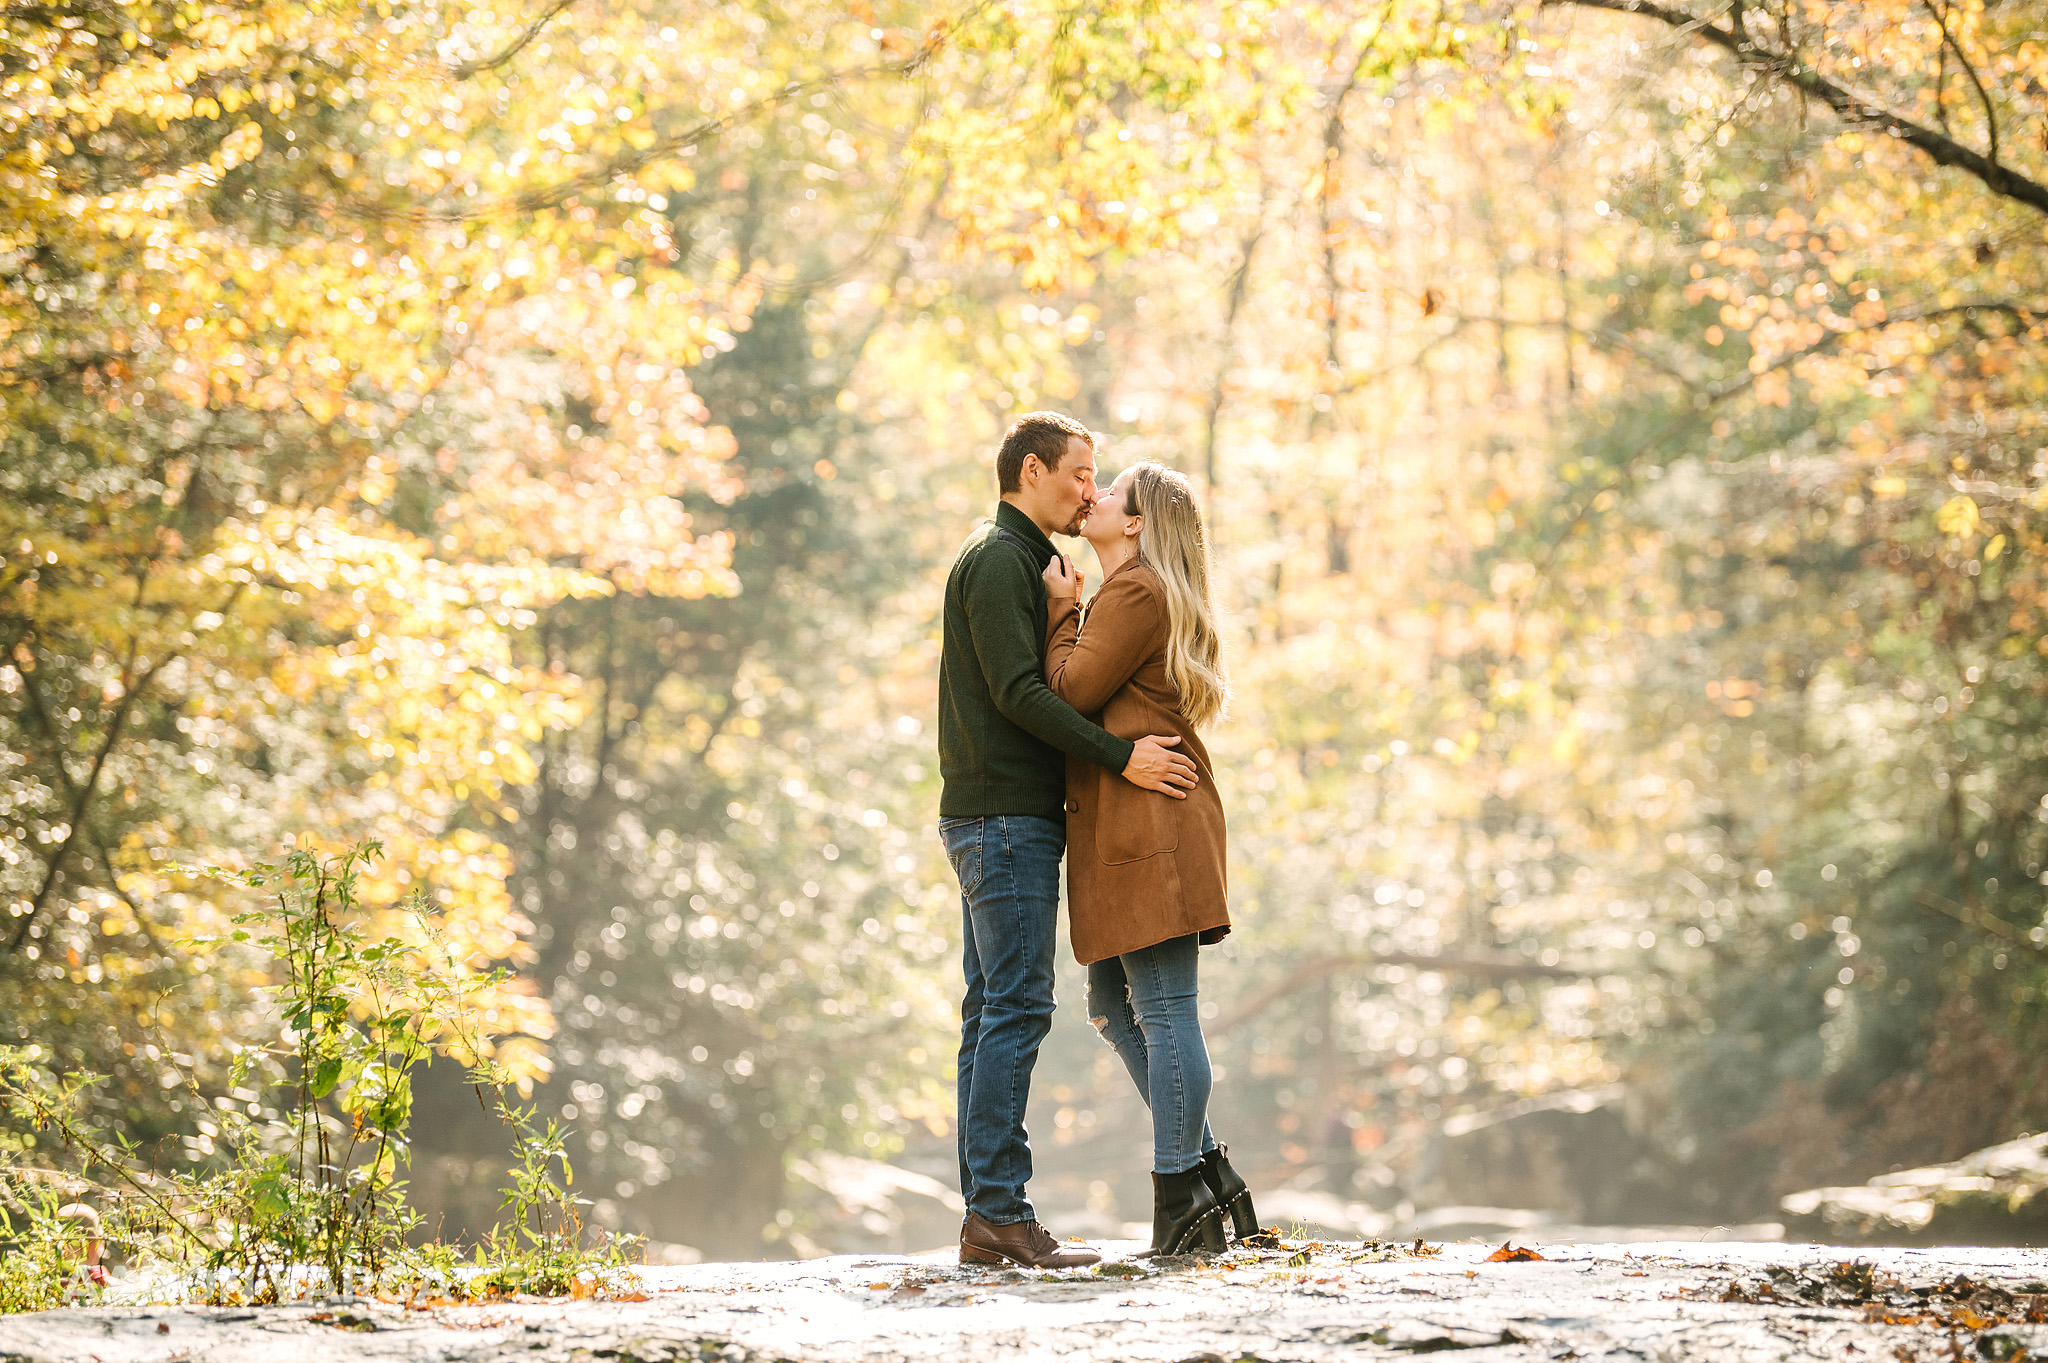 Fall Engagement Session Ohiopyle State Park - Janell + Kyle | Ohiopyle State Park Engagement Photos